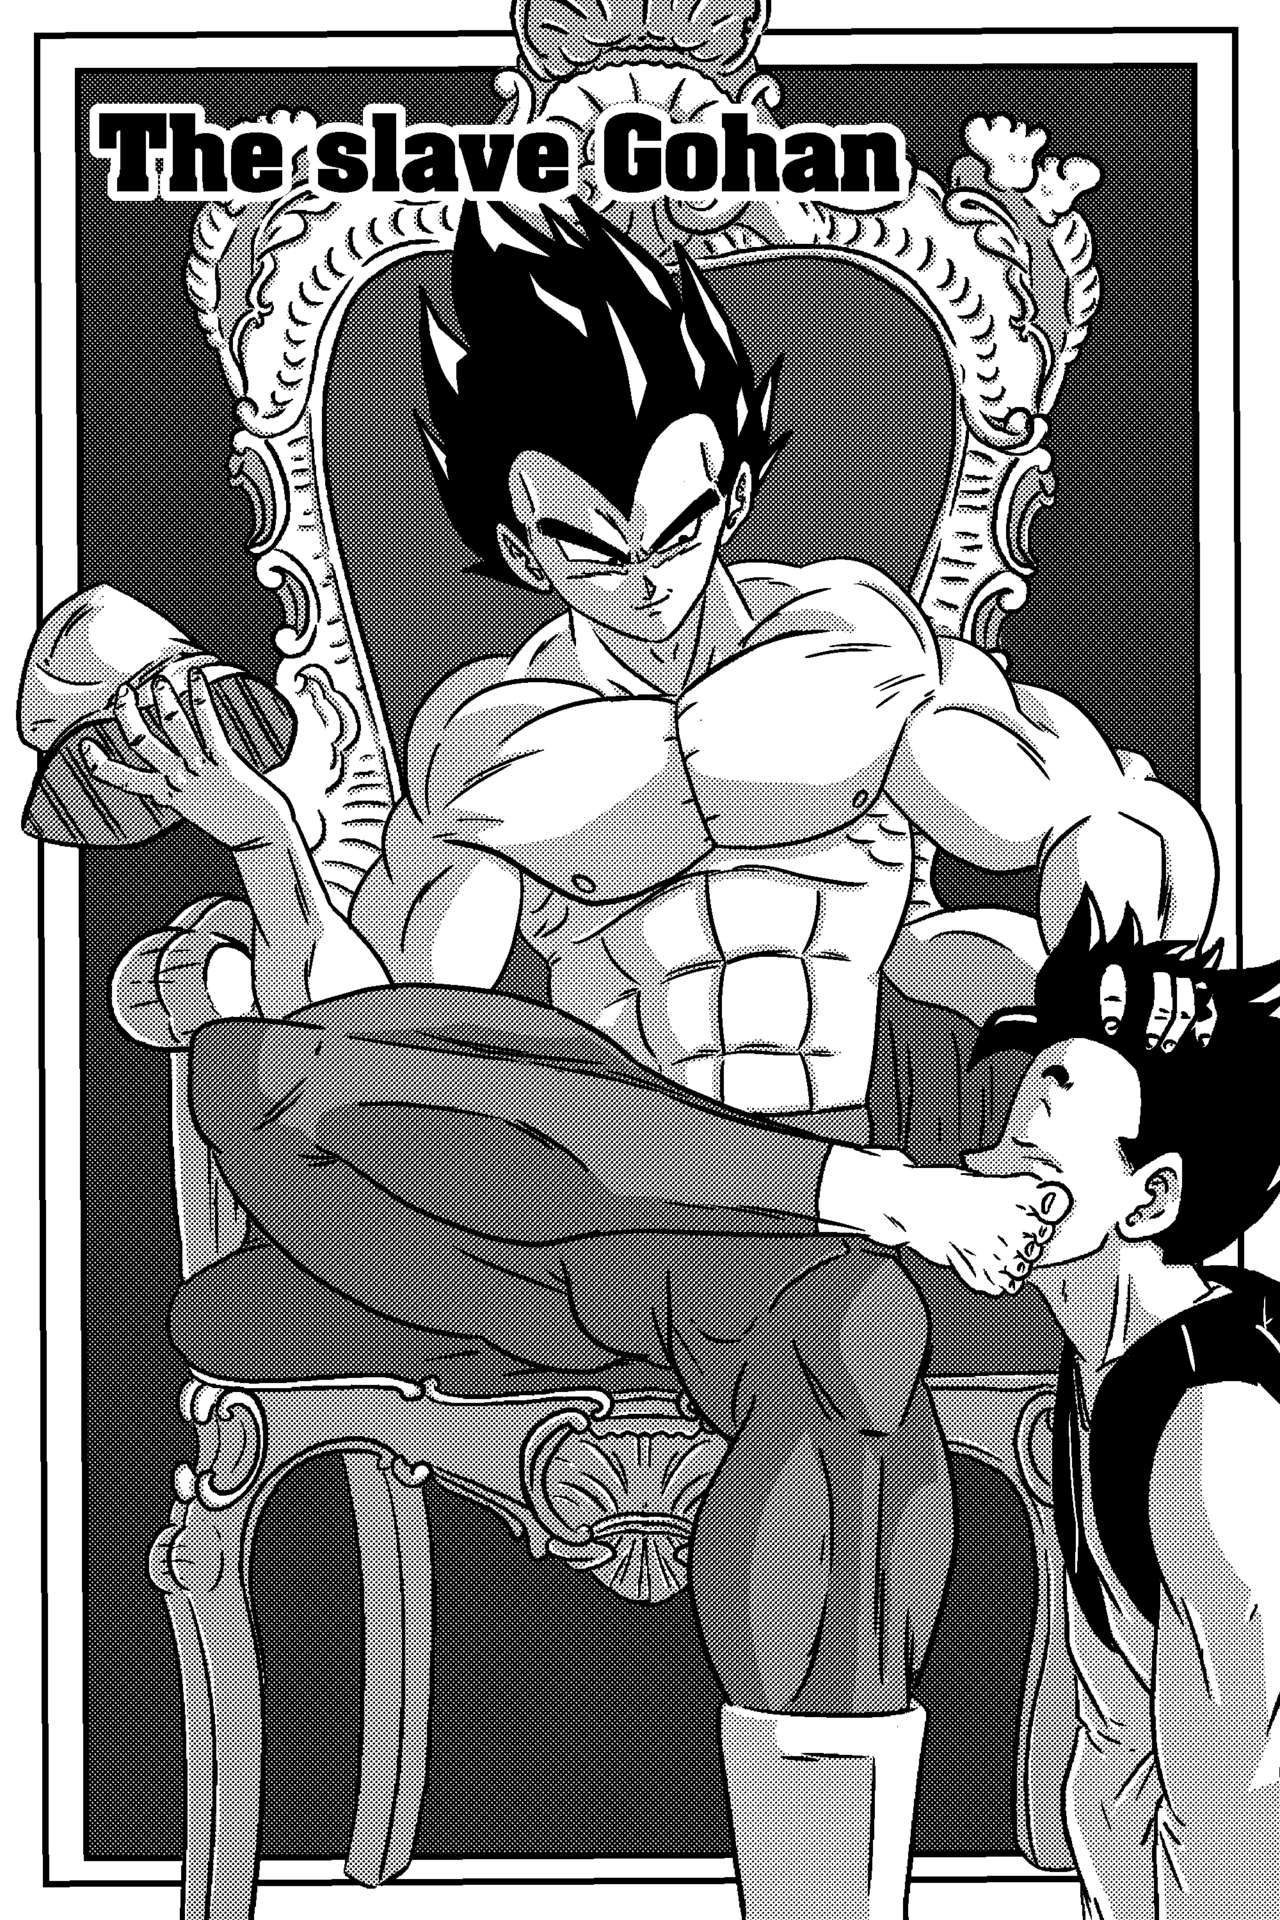 1709684 main vegeta the paradise in his feet chapter 3 by supervegeta555 ddvu3nz